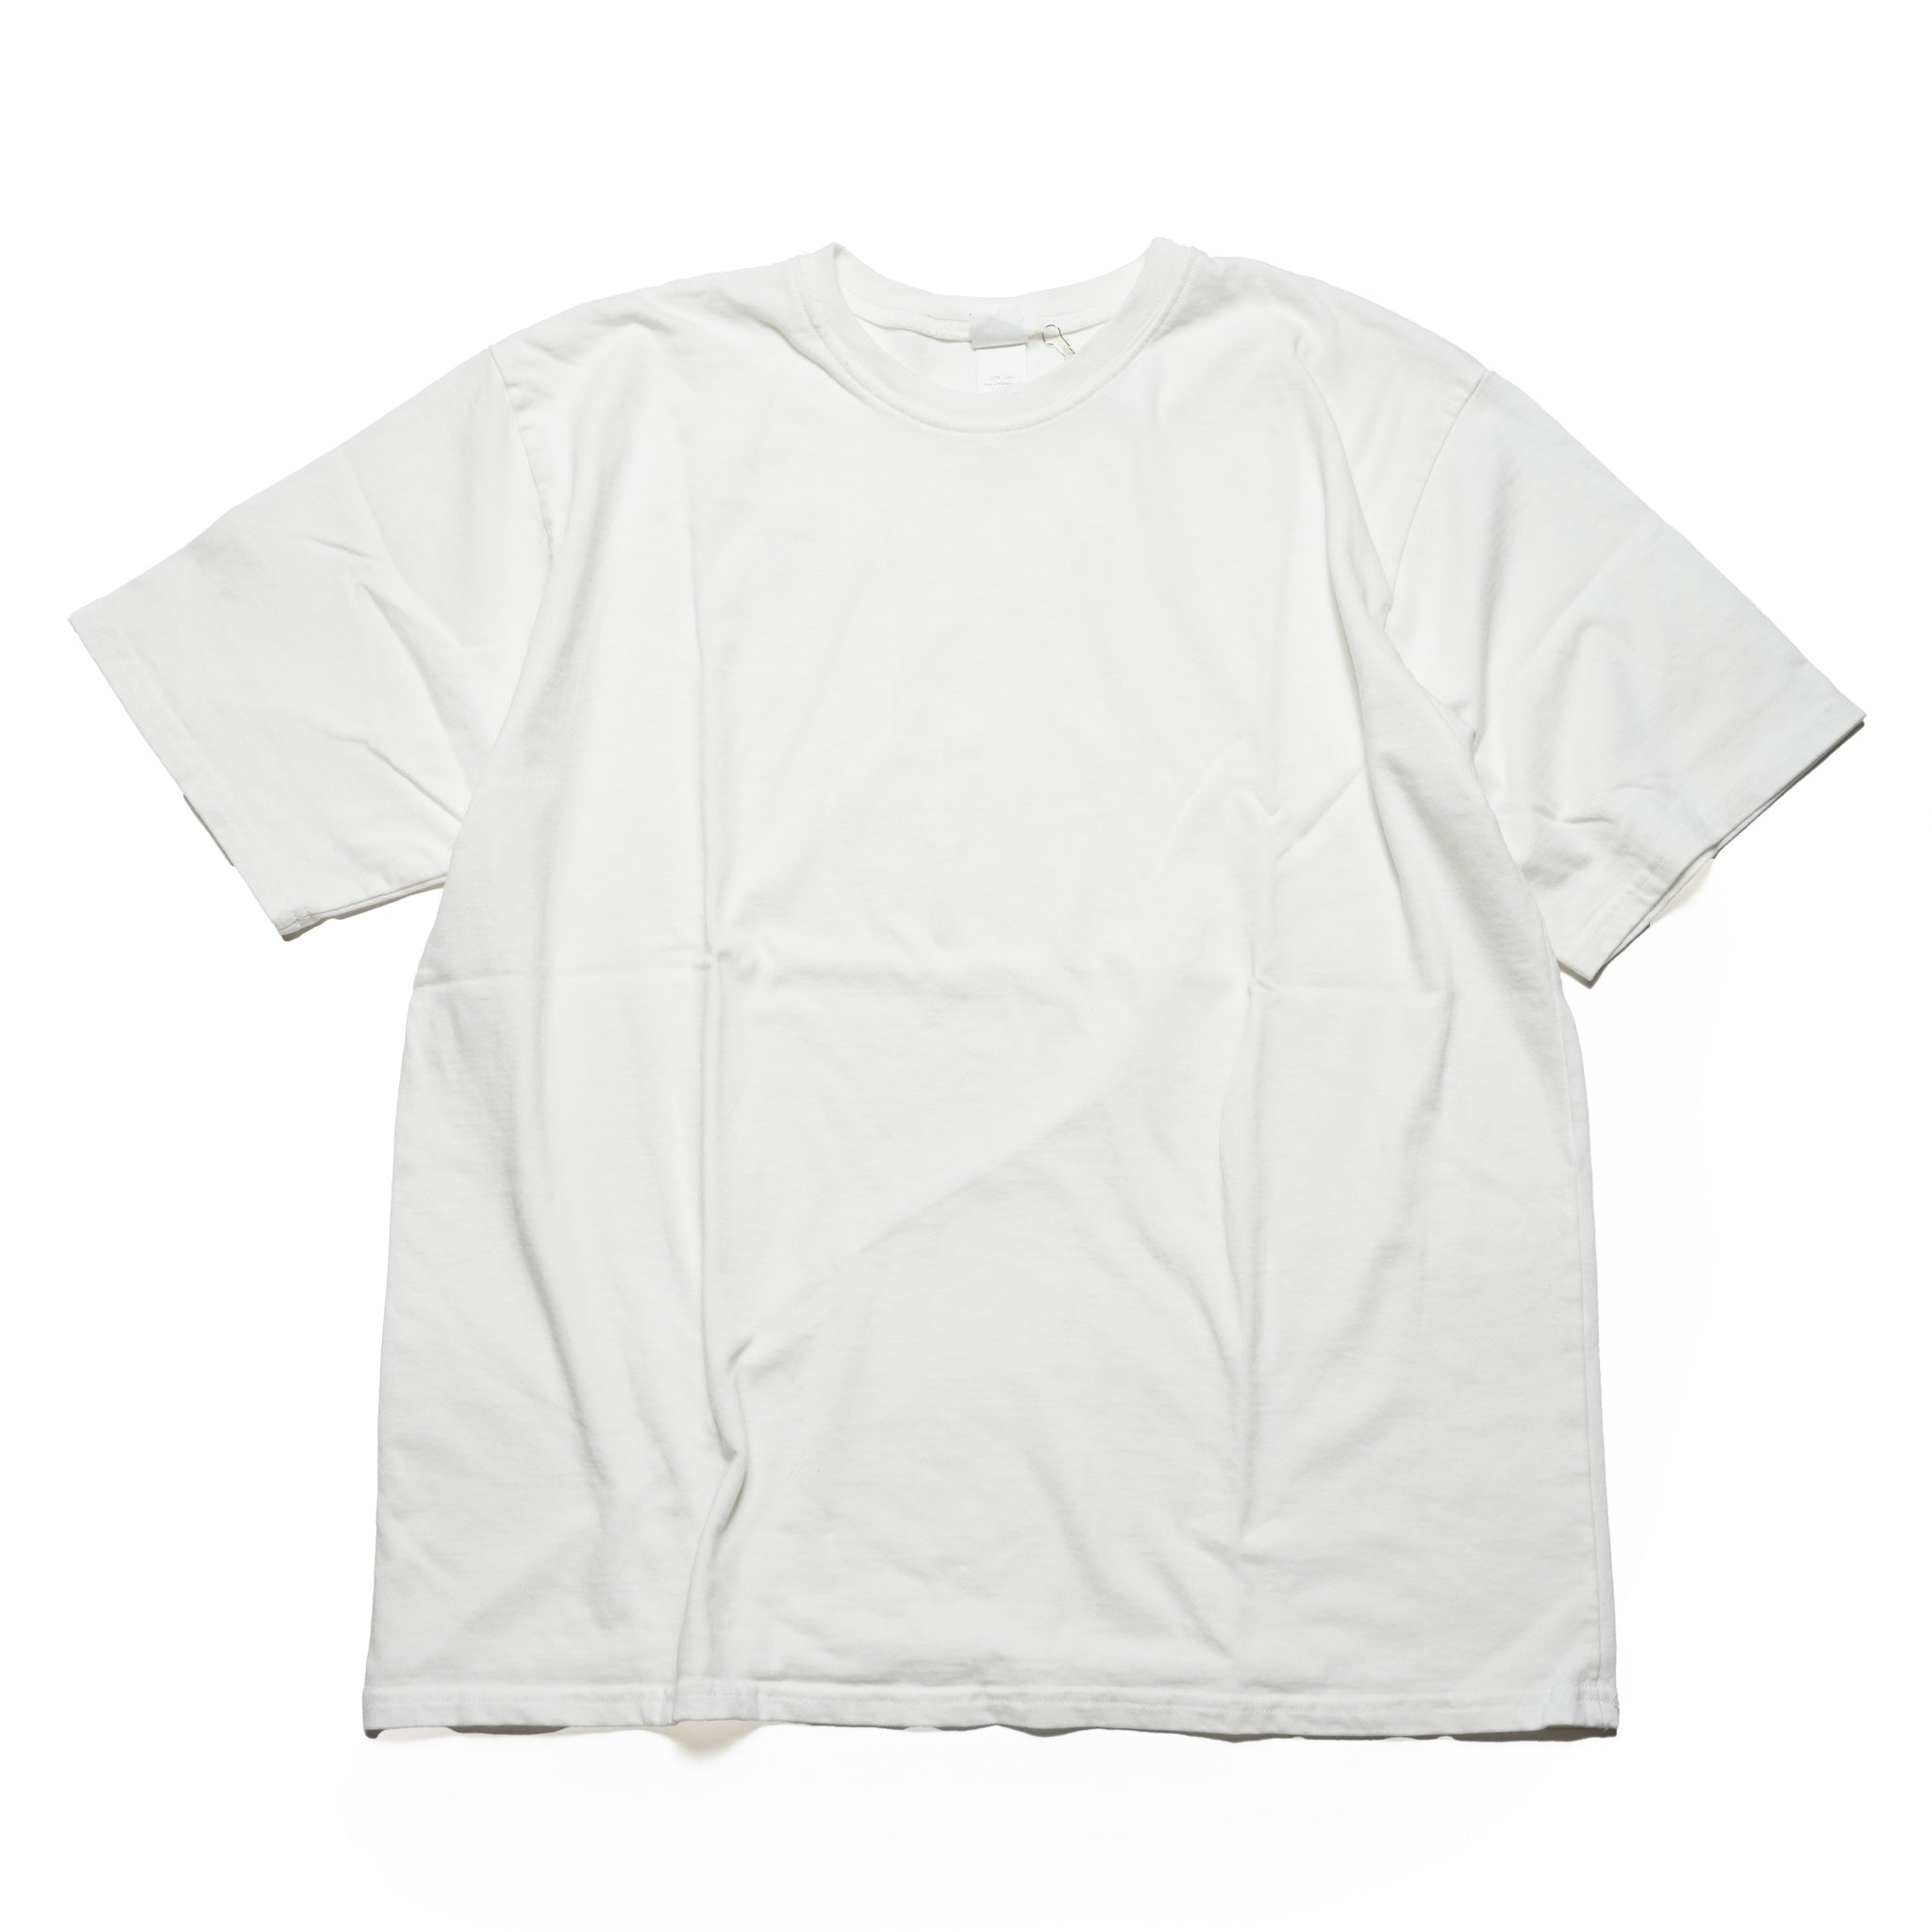 No:cstm01 | Name:Heavy Coton SS Tee | Color:#White| Size:M/L/XL | 【SMOKE T ONE】【Smoke T One】【ONE CS FITS ALL】